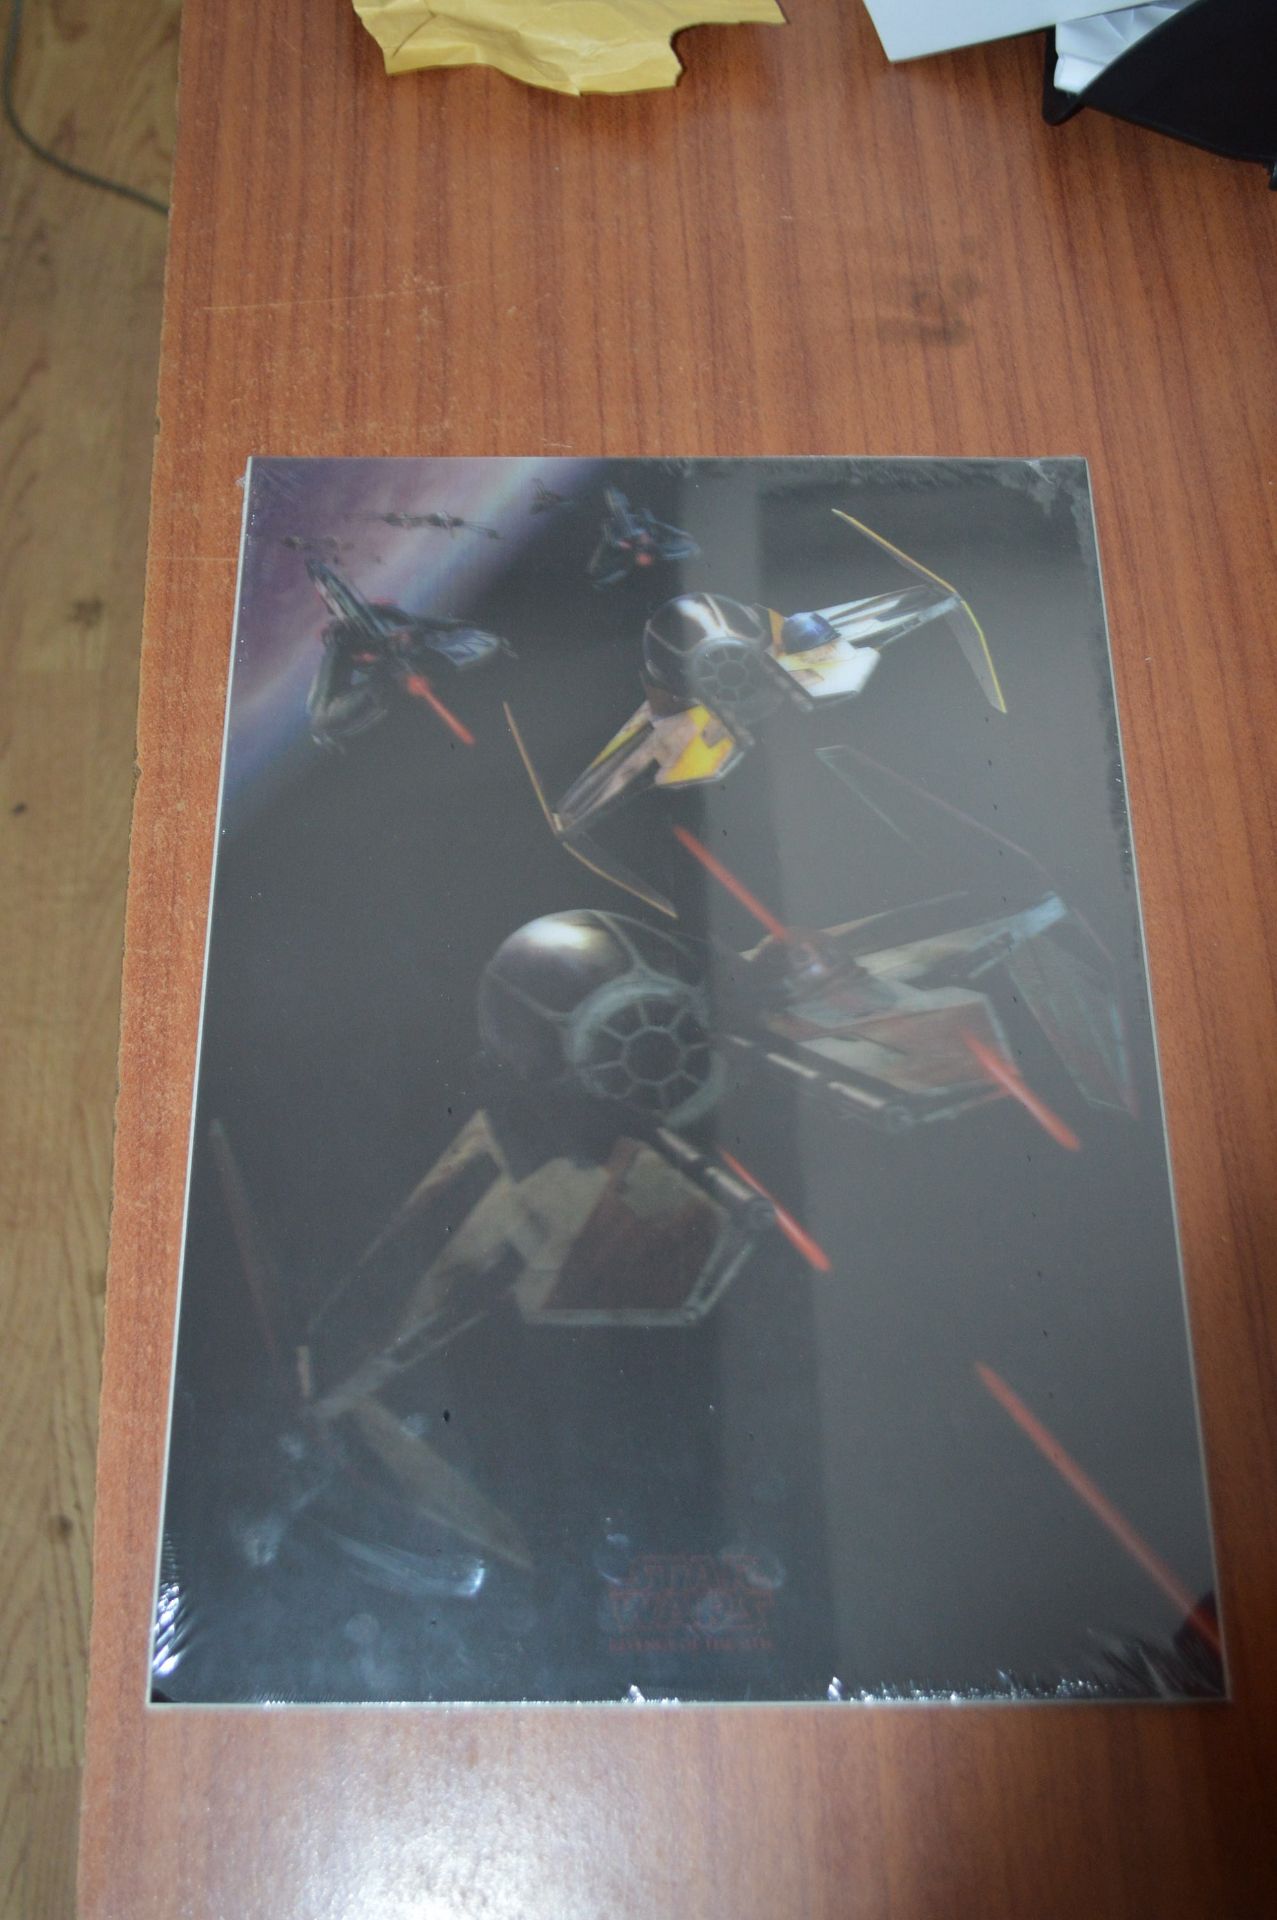 LIMITED EDITION STAR WARS 3D LITHOGRAPHIC PRINT WITH CERTIFICATE OF AUTHENTICITY - Image 2 of 4